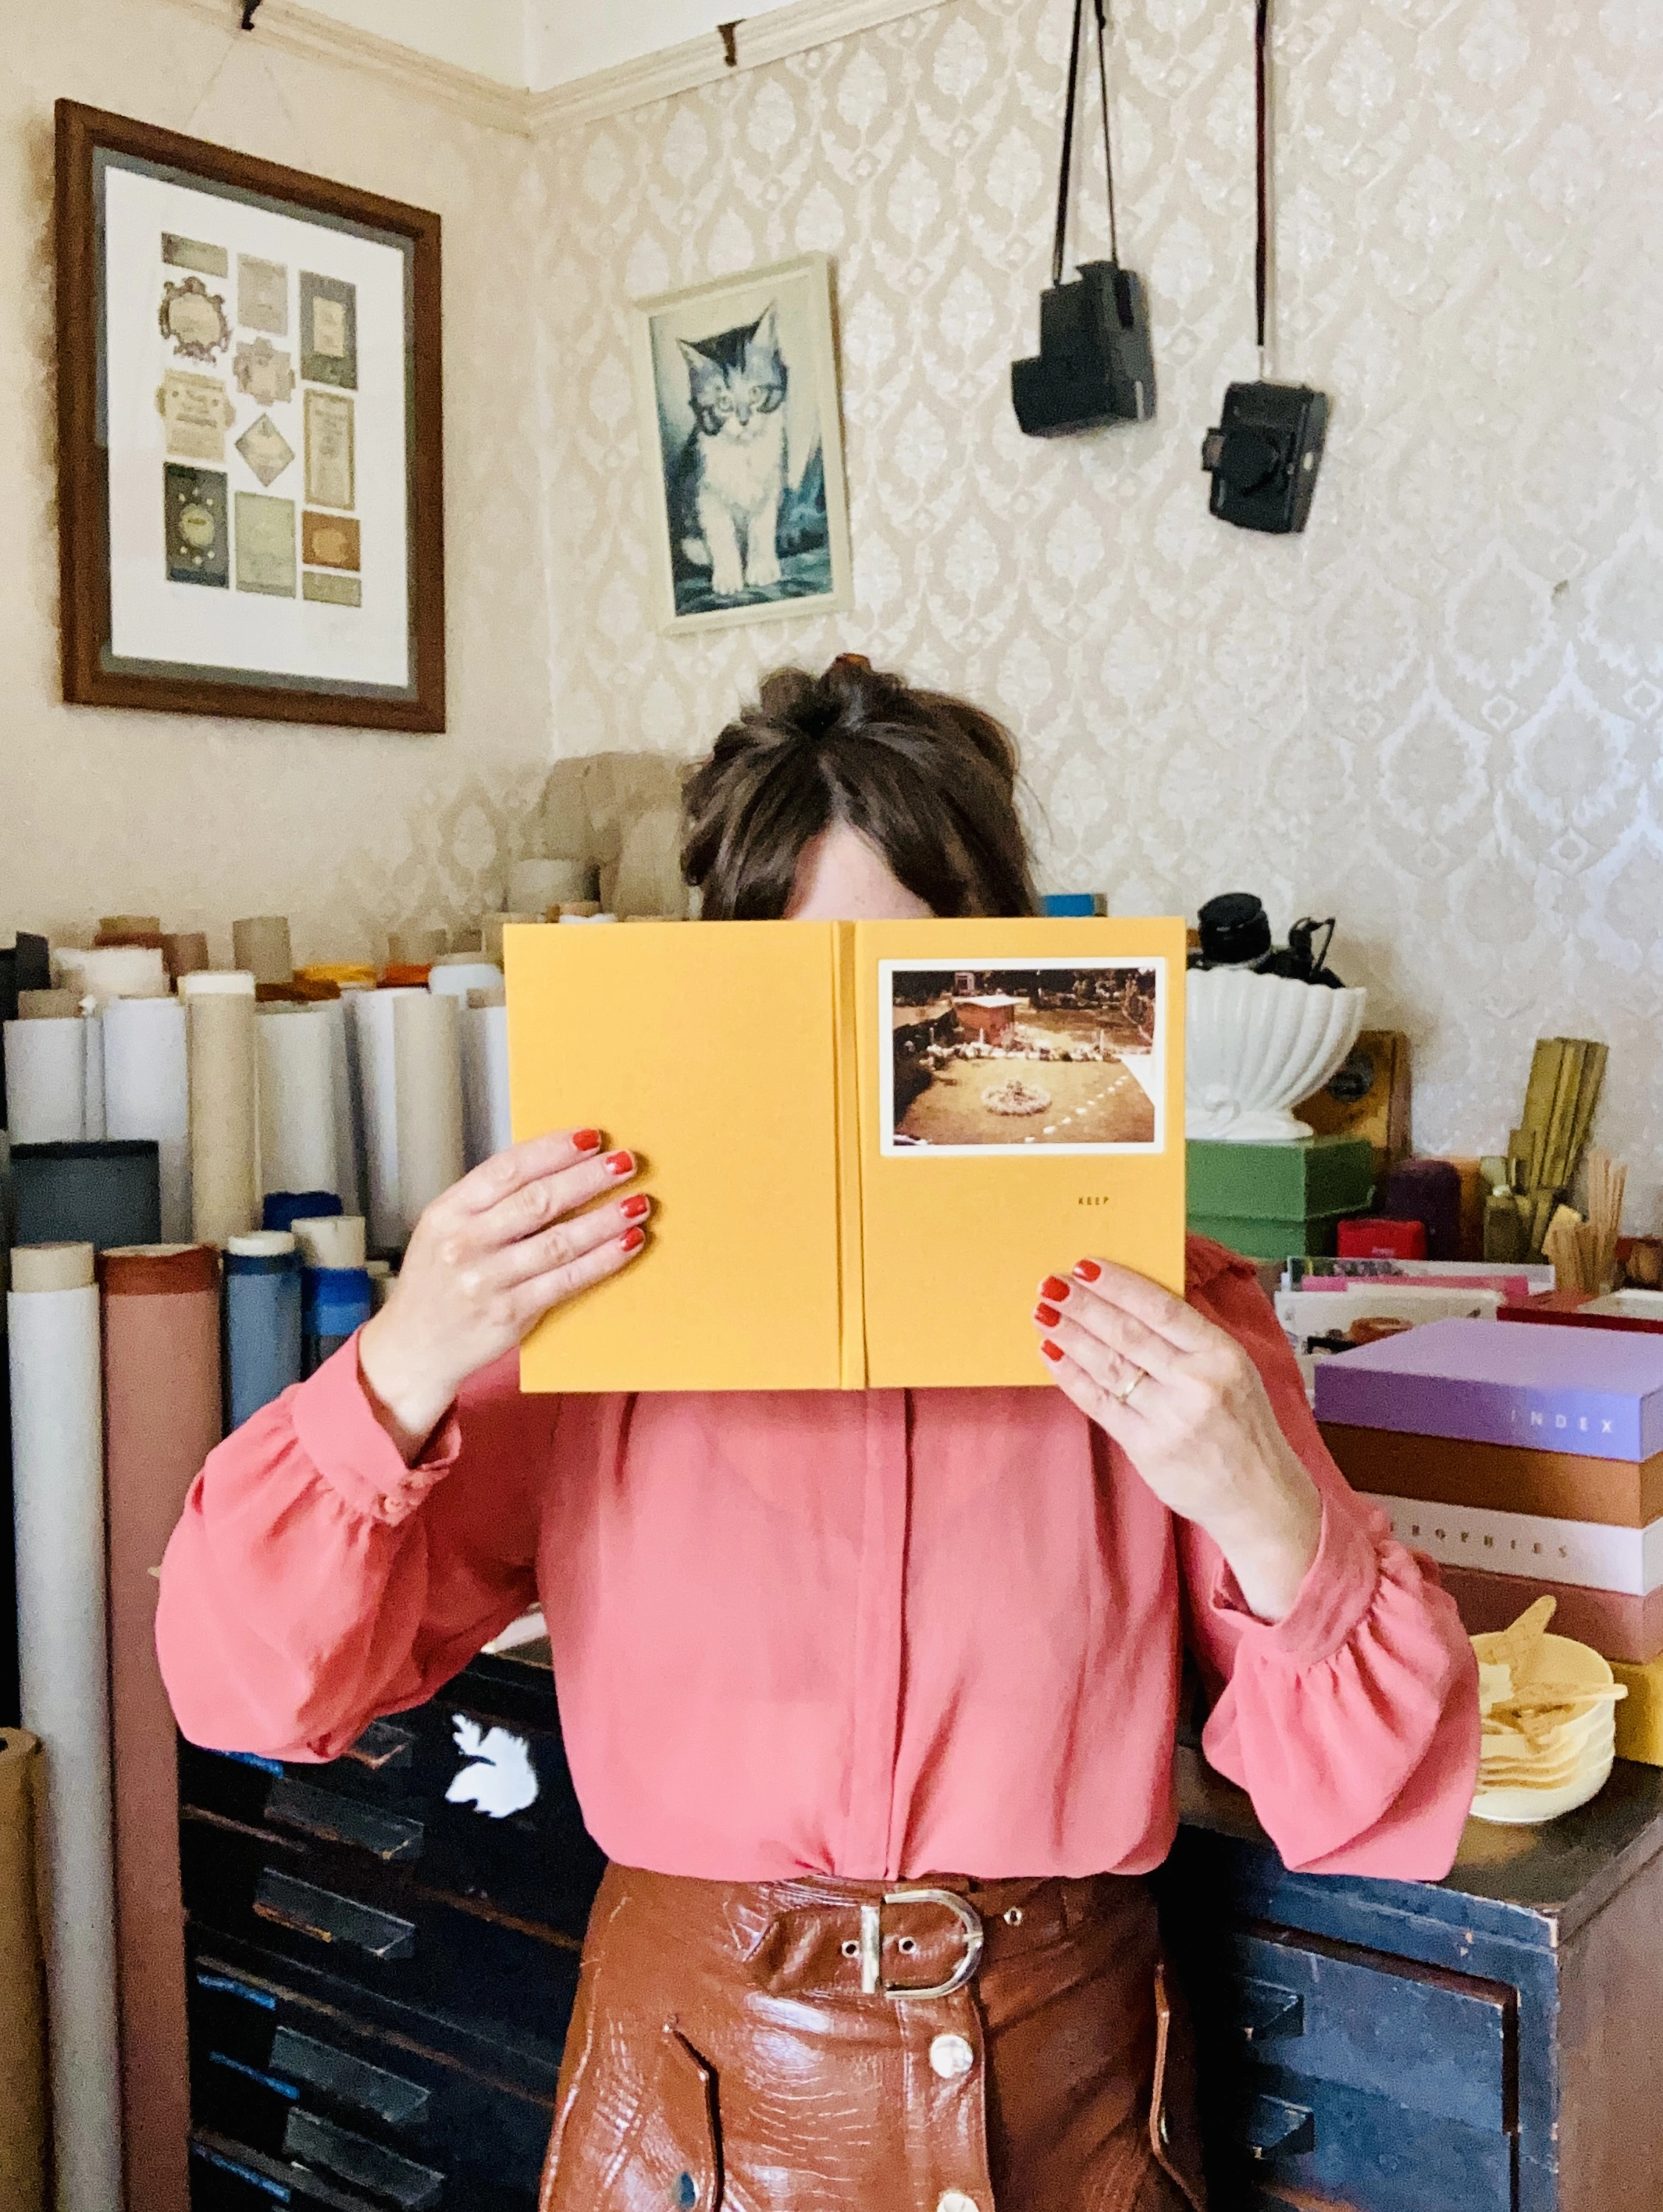 Keep Collect founder Cat in her Margate studio hiding behind one of her handmade books